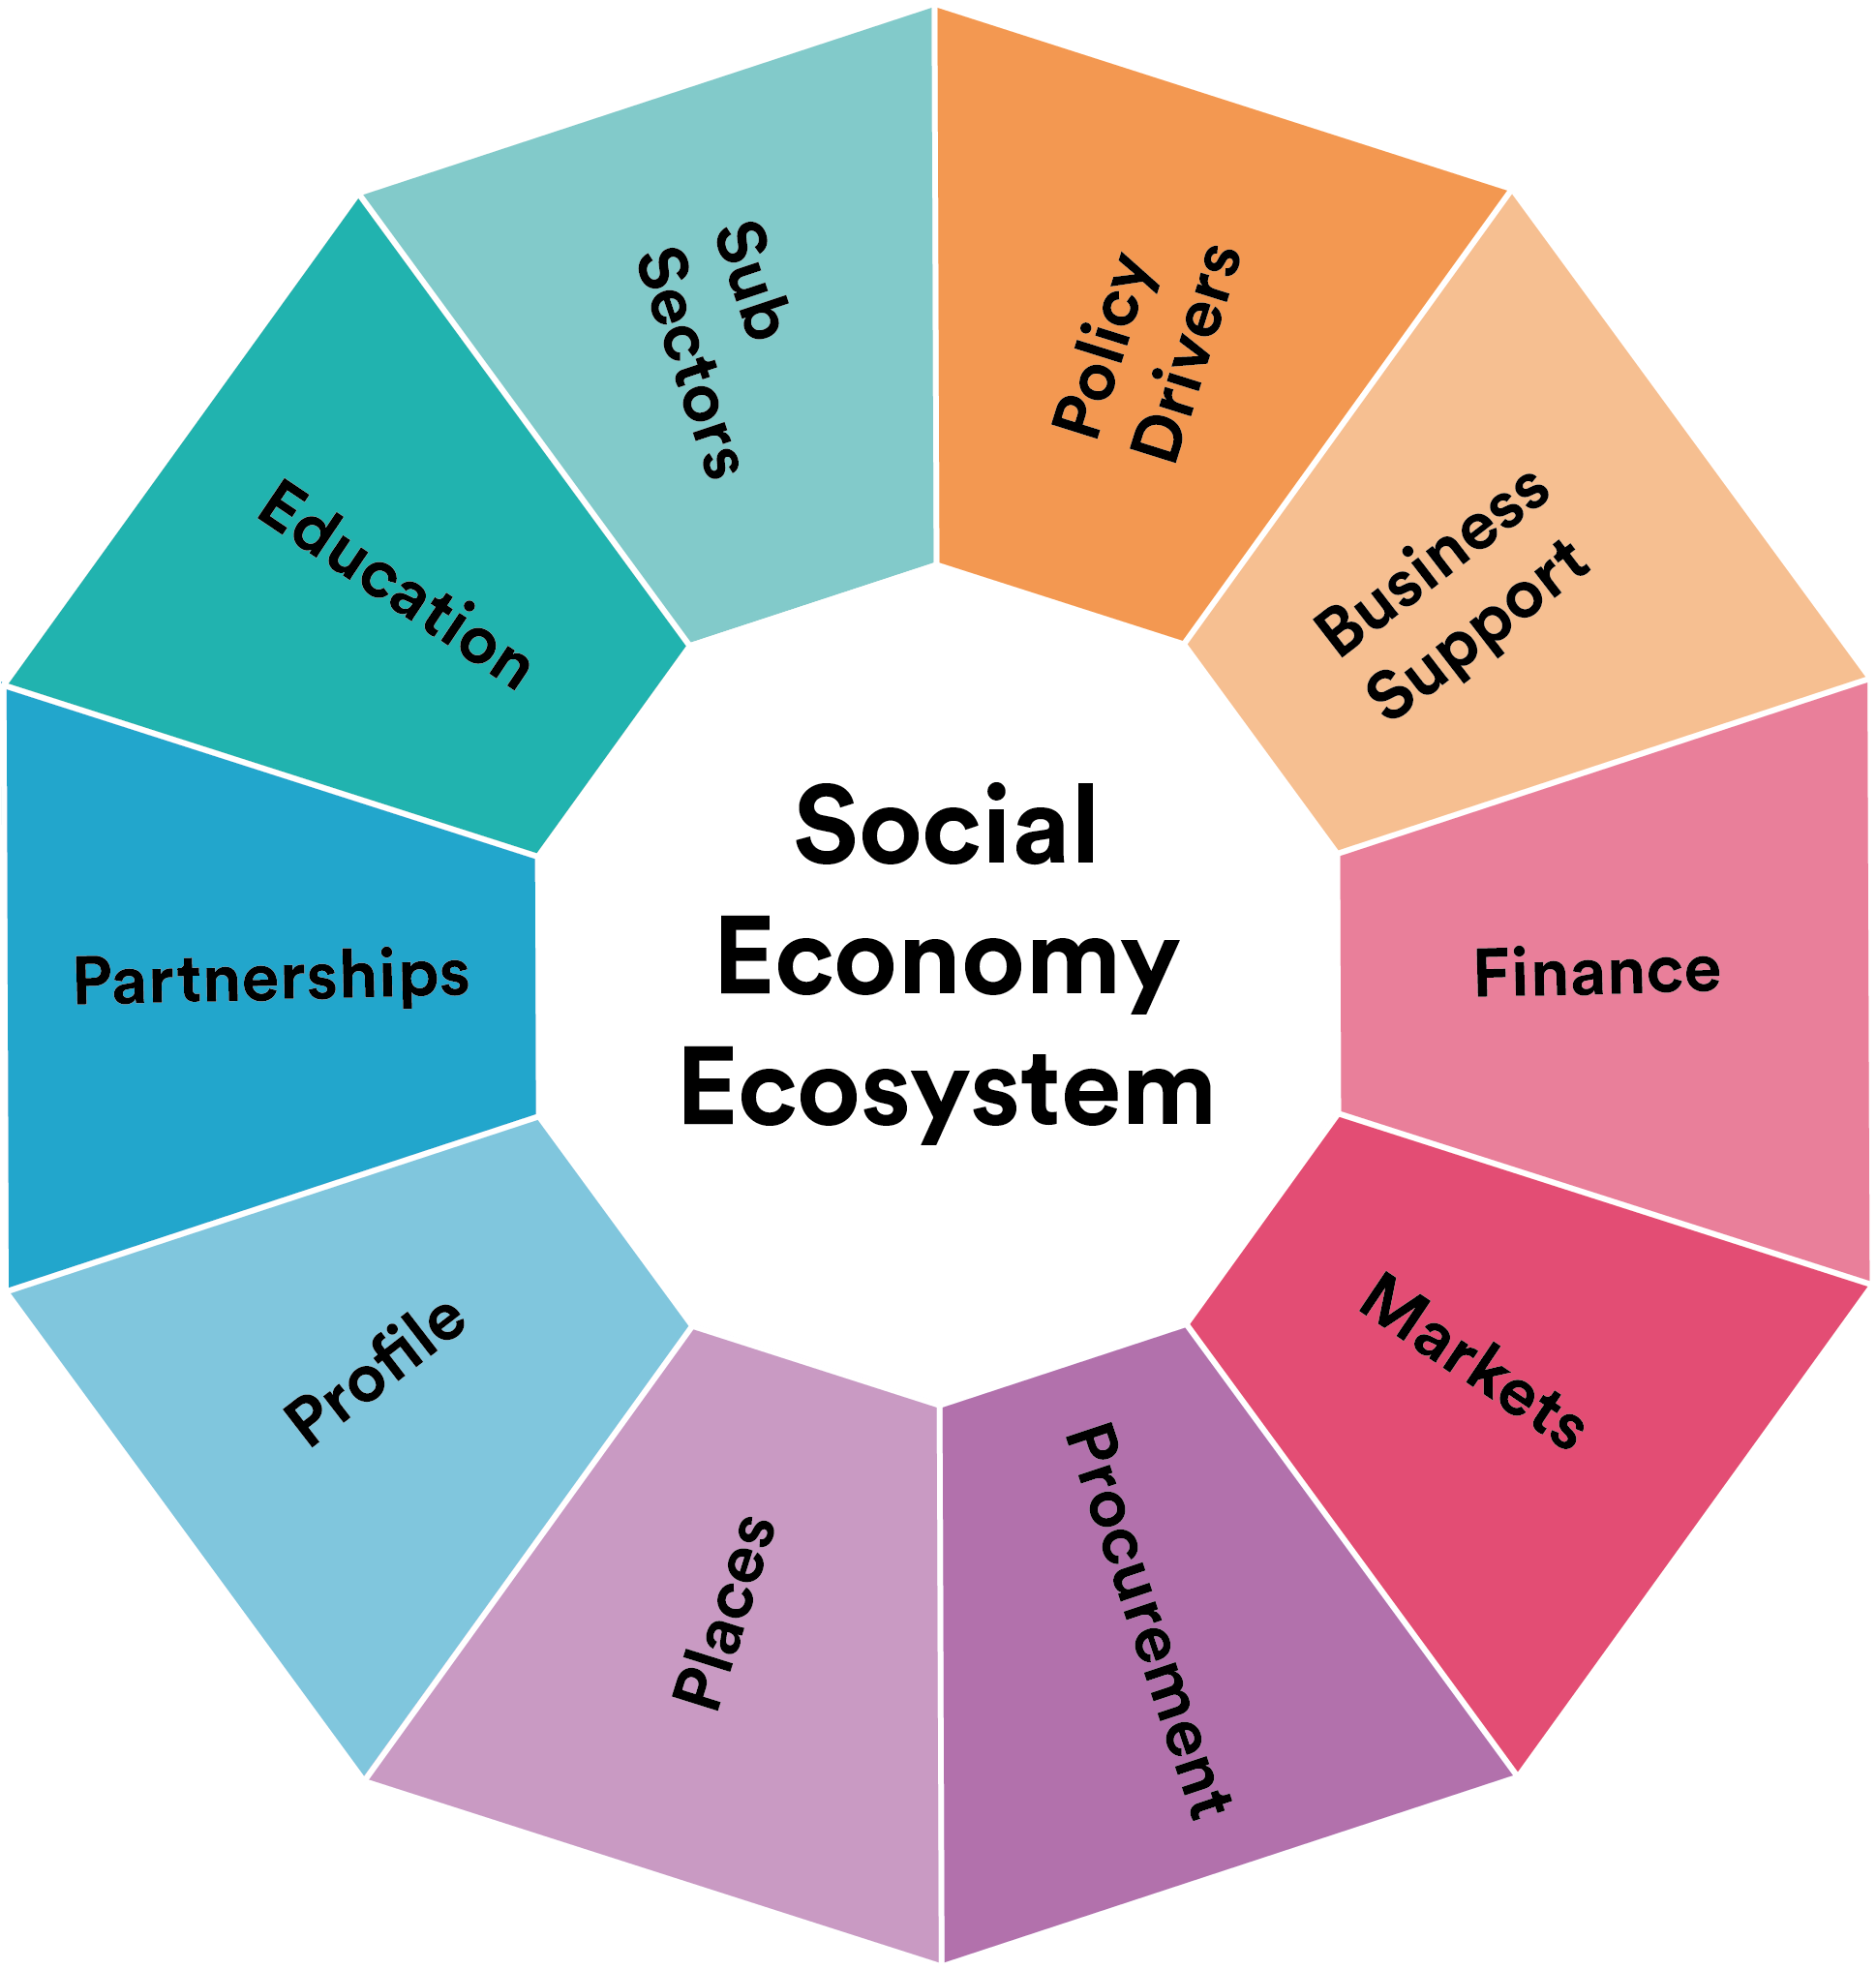 Graphic showing the different elements of the Social Economy Ecosystem